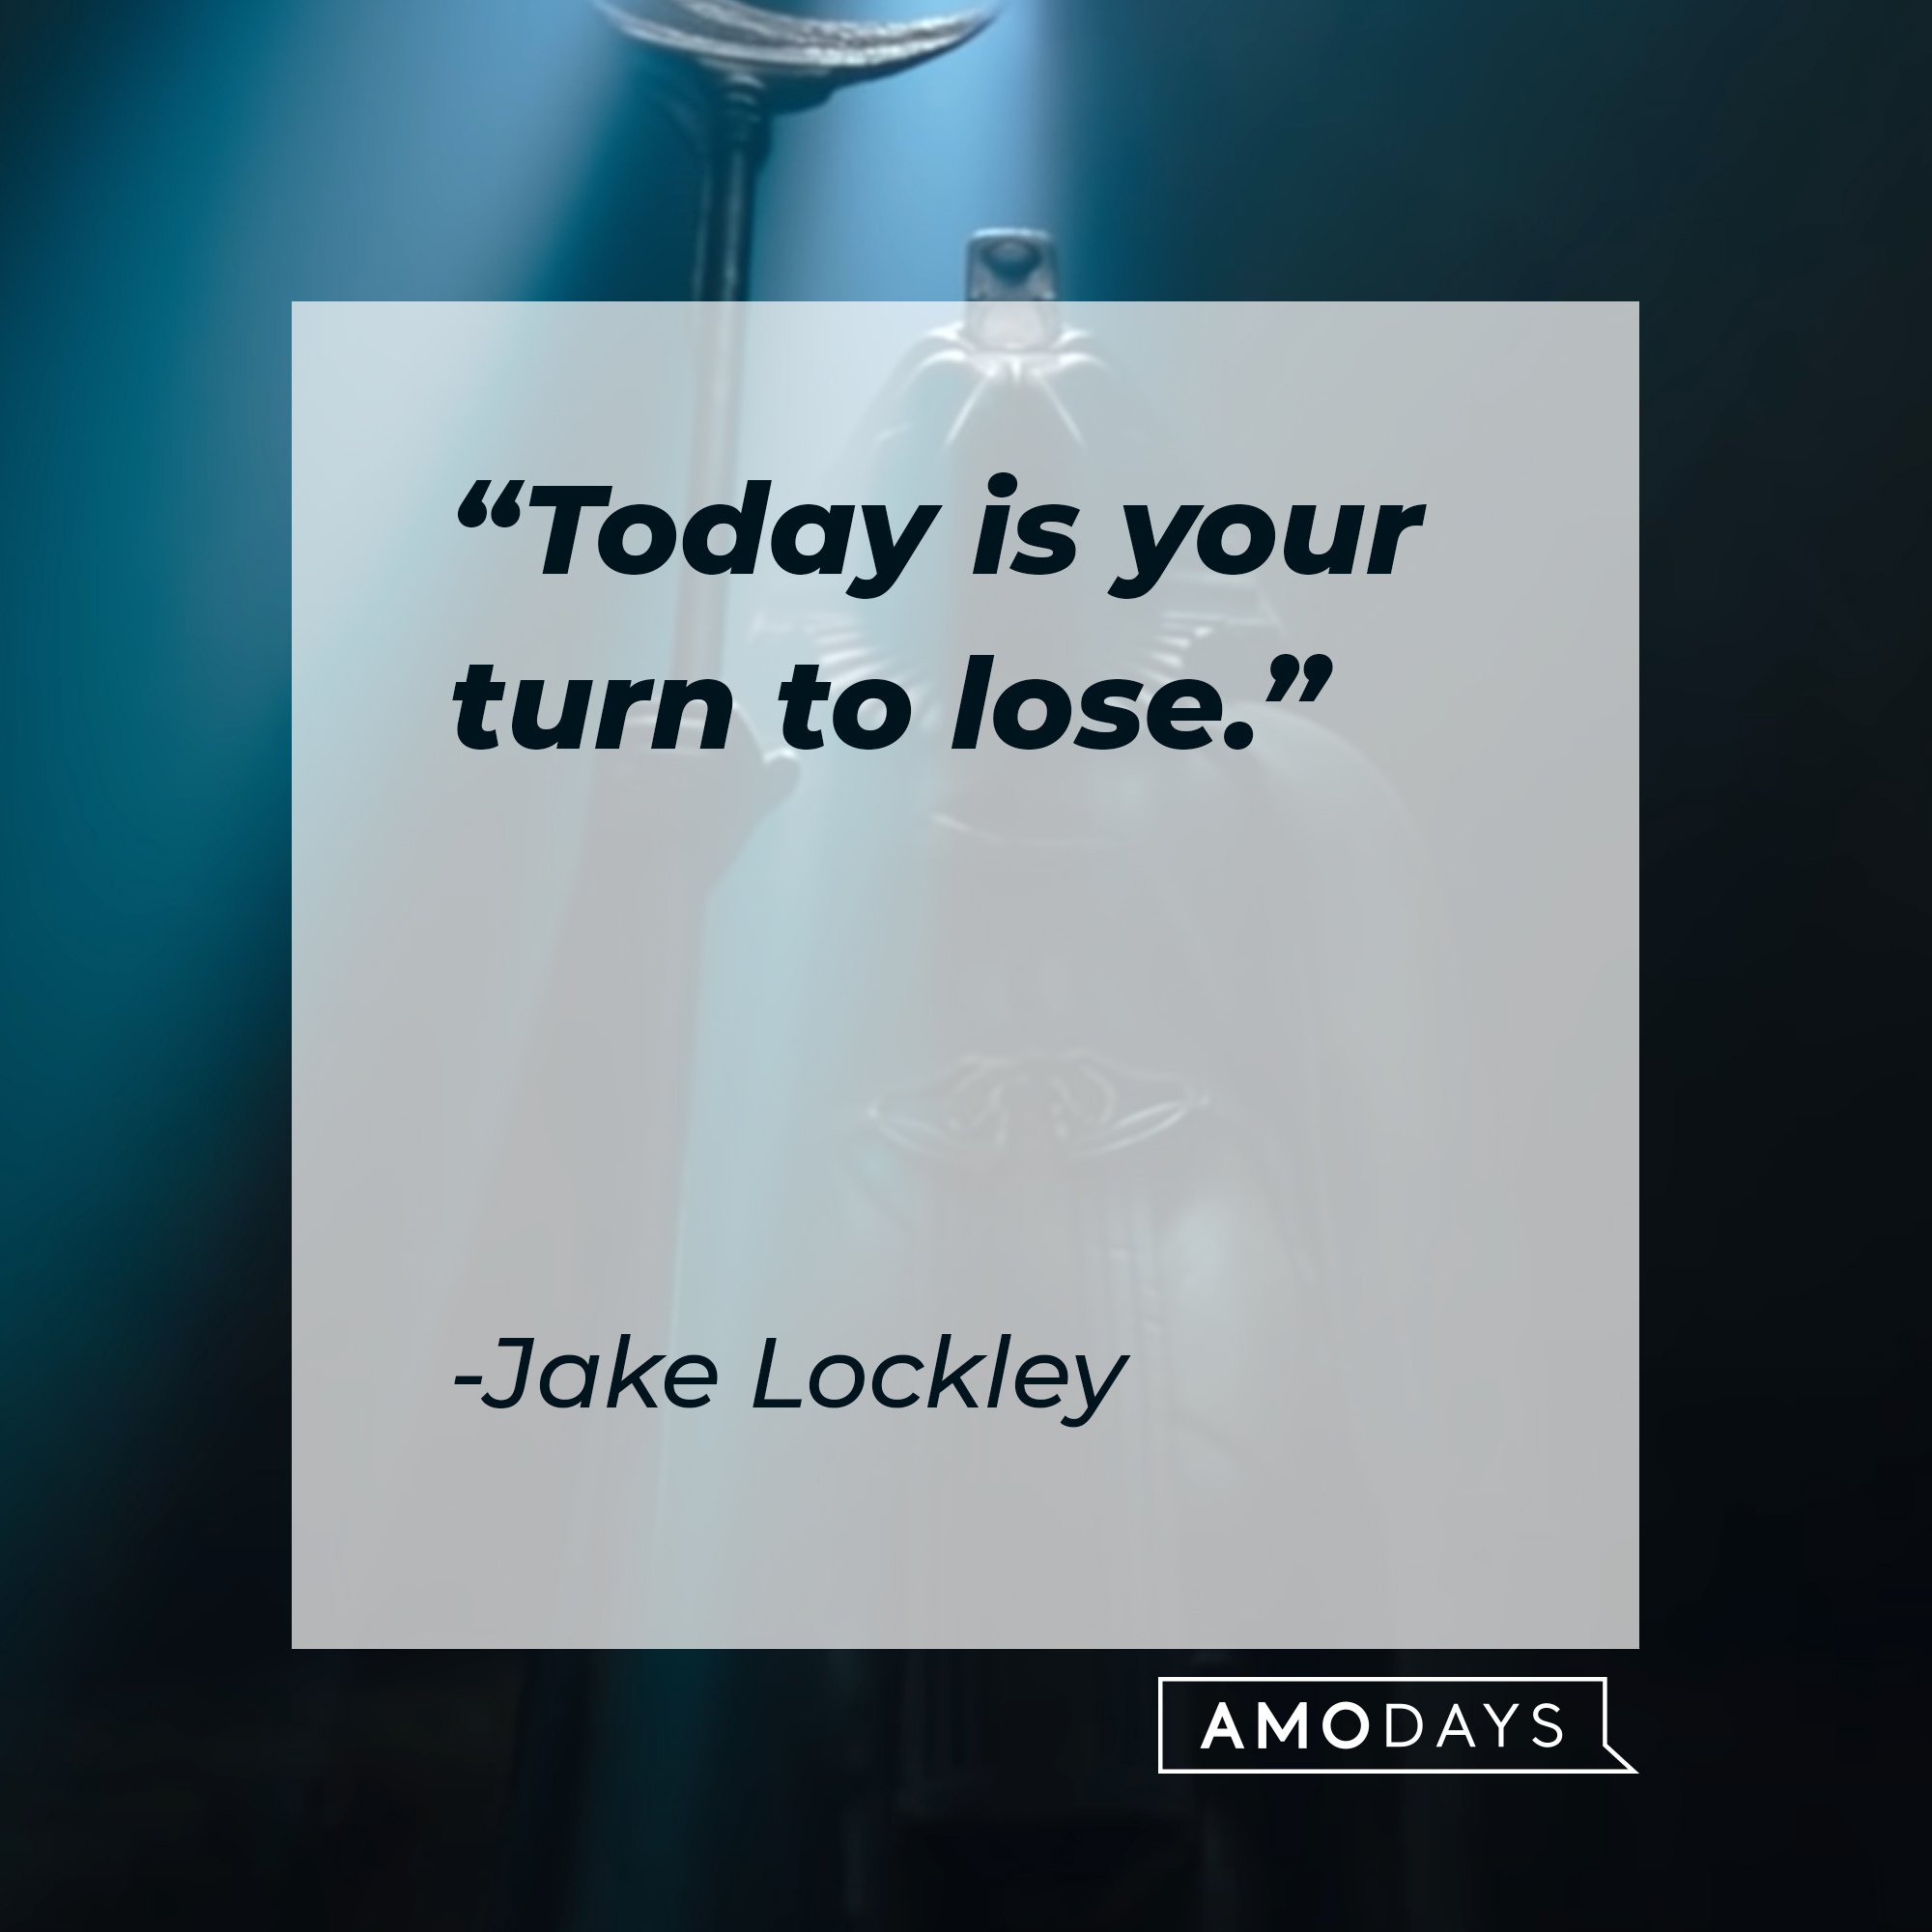 Jake Lockley’s quote: "Today is your turn to lose." | Image: AmoDays